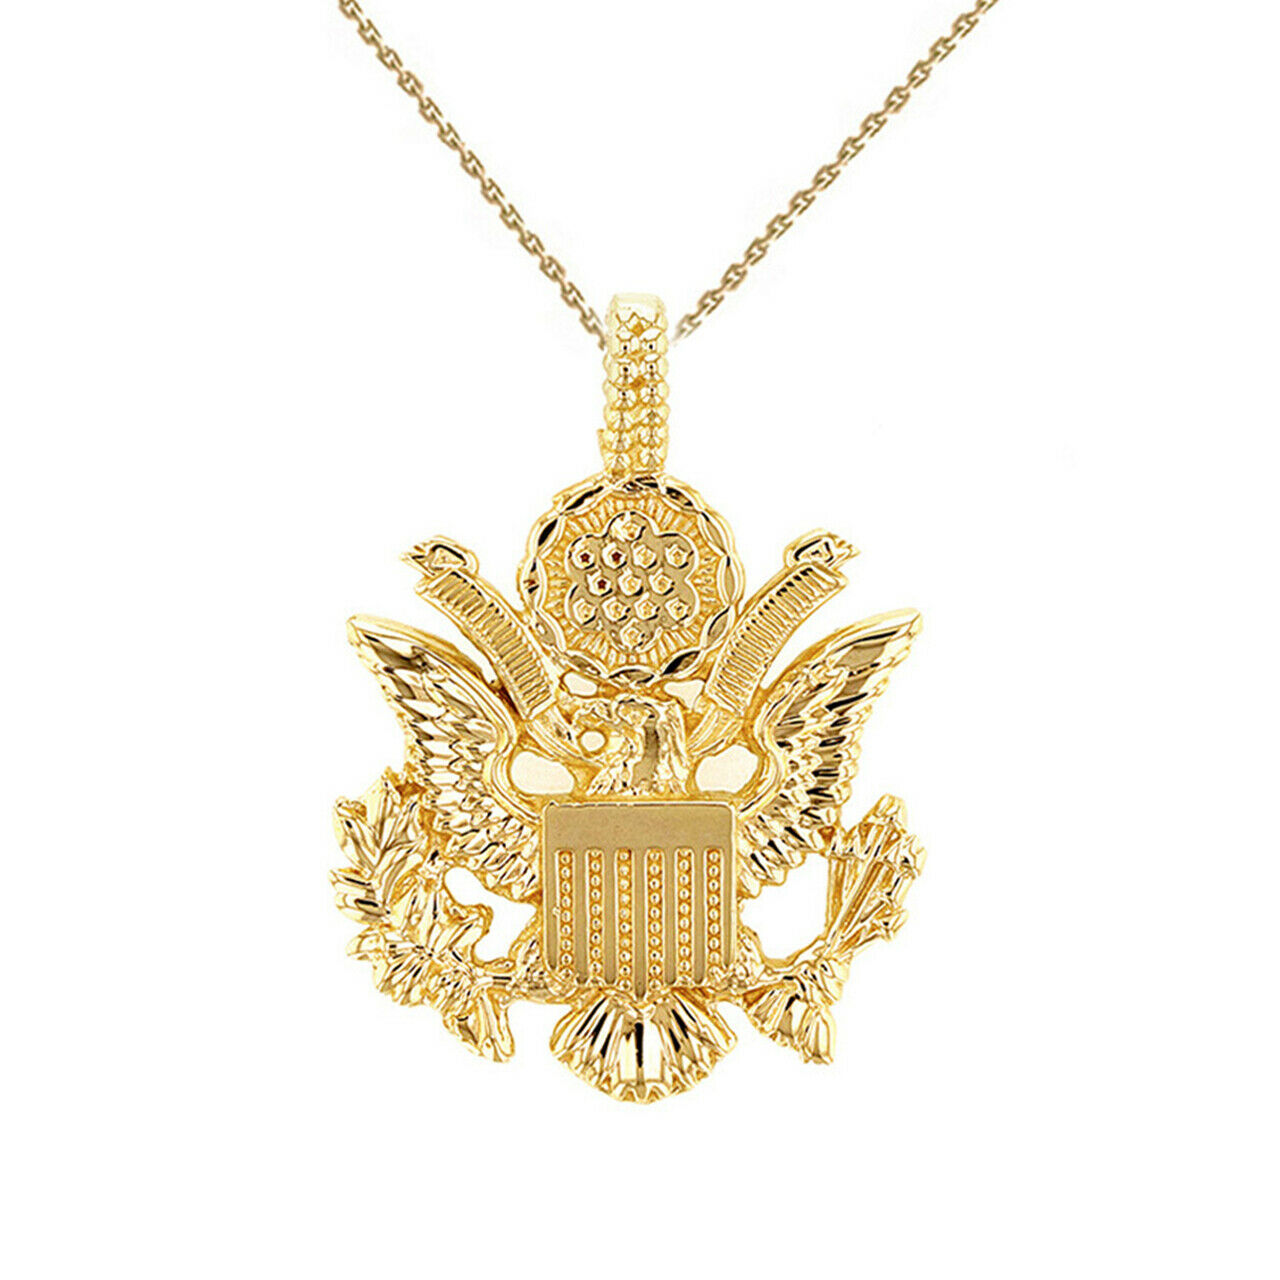 10k Solid Gold American Eagle Coat of Arms Pendant Necklace